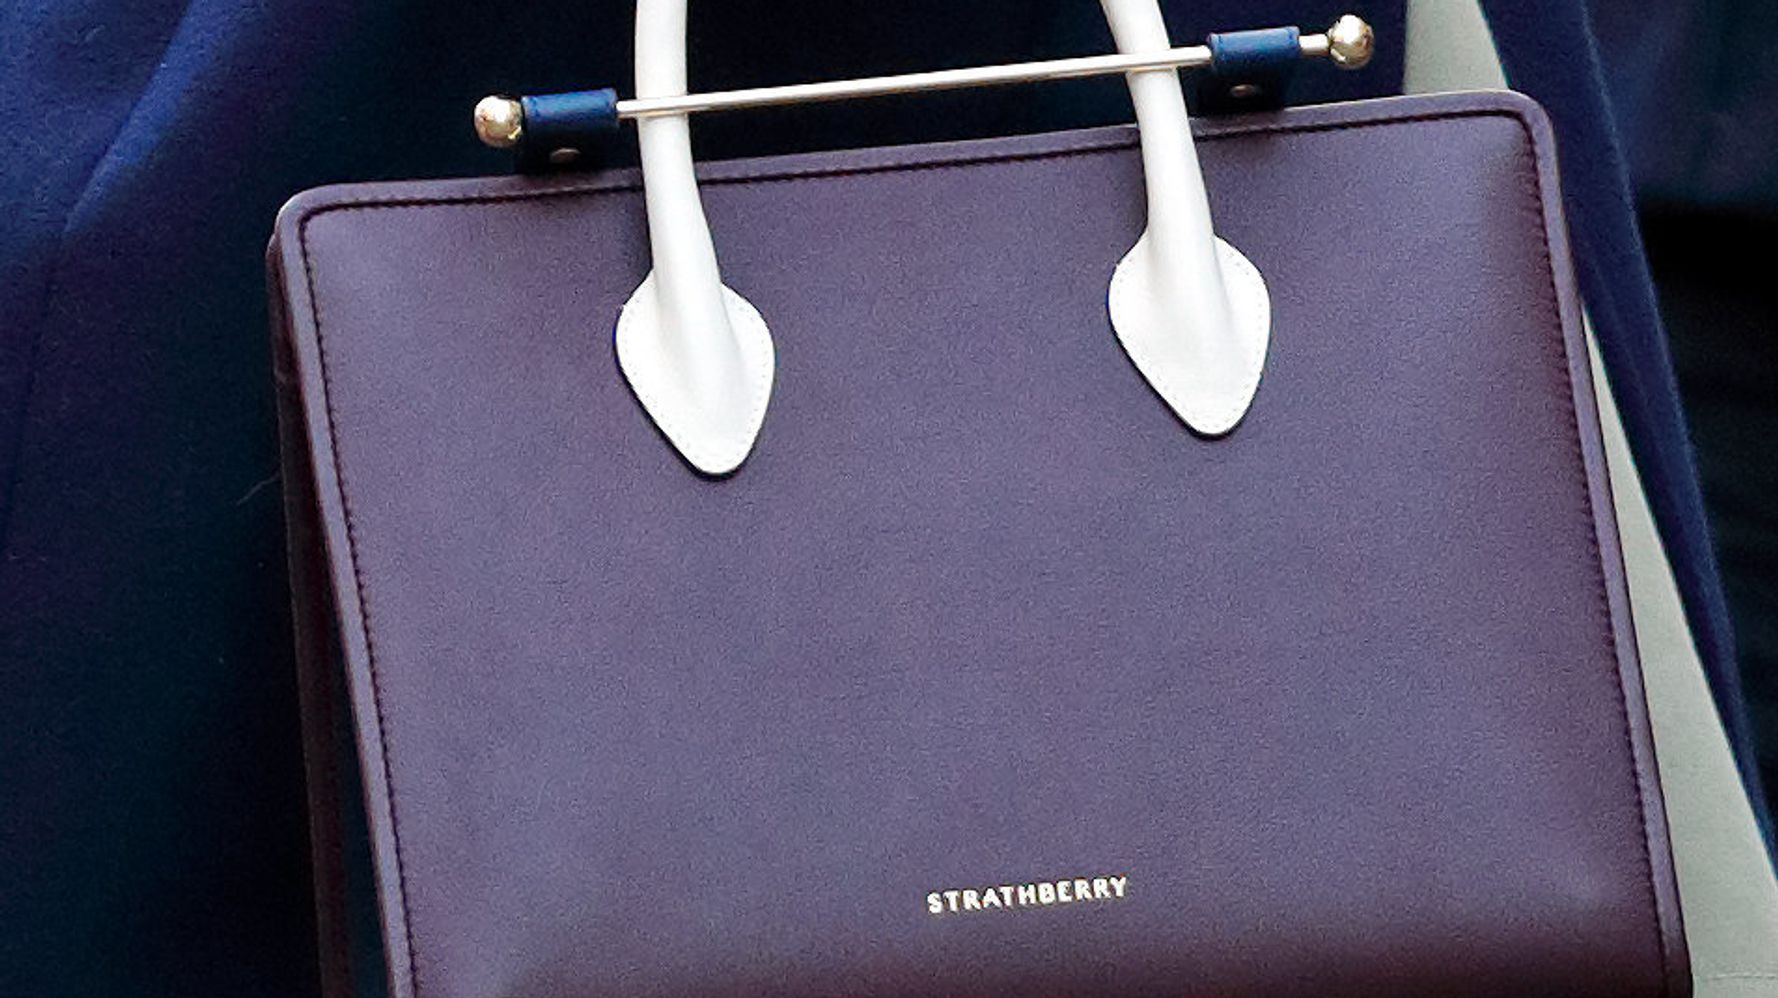 Meghan Markle's Sellout Strathberry Handbag Is Up For Auction - Grazia